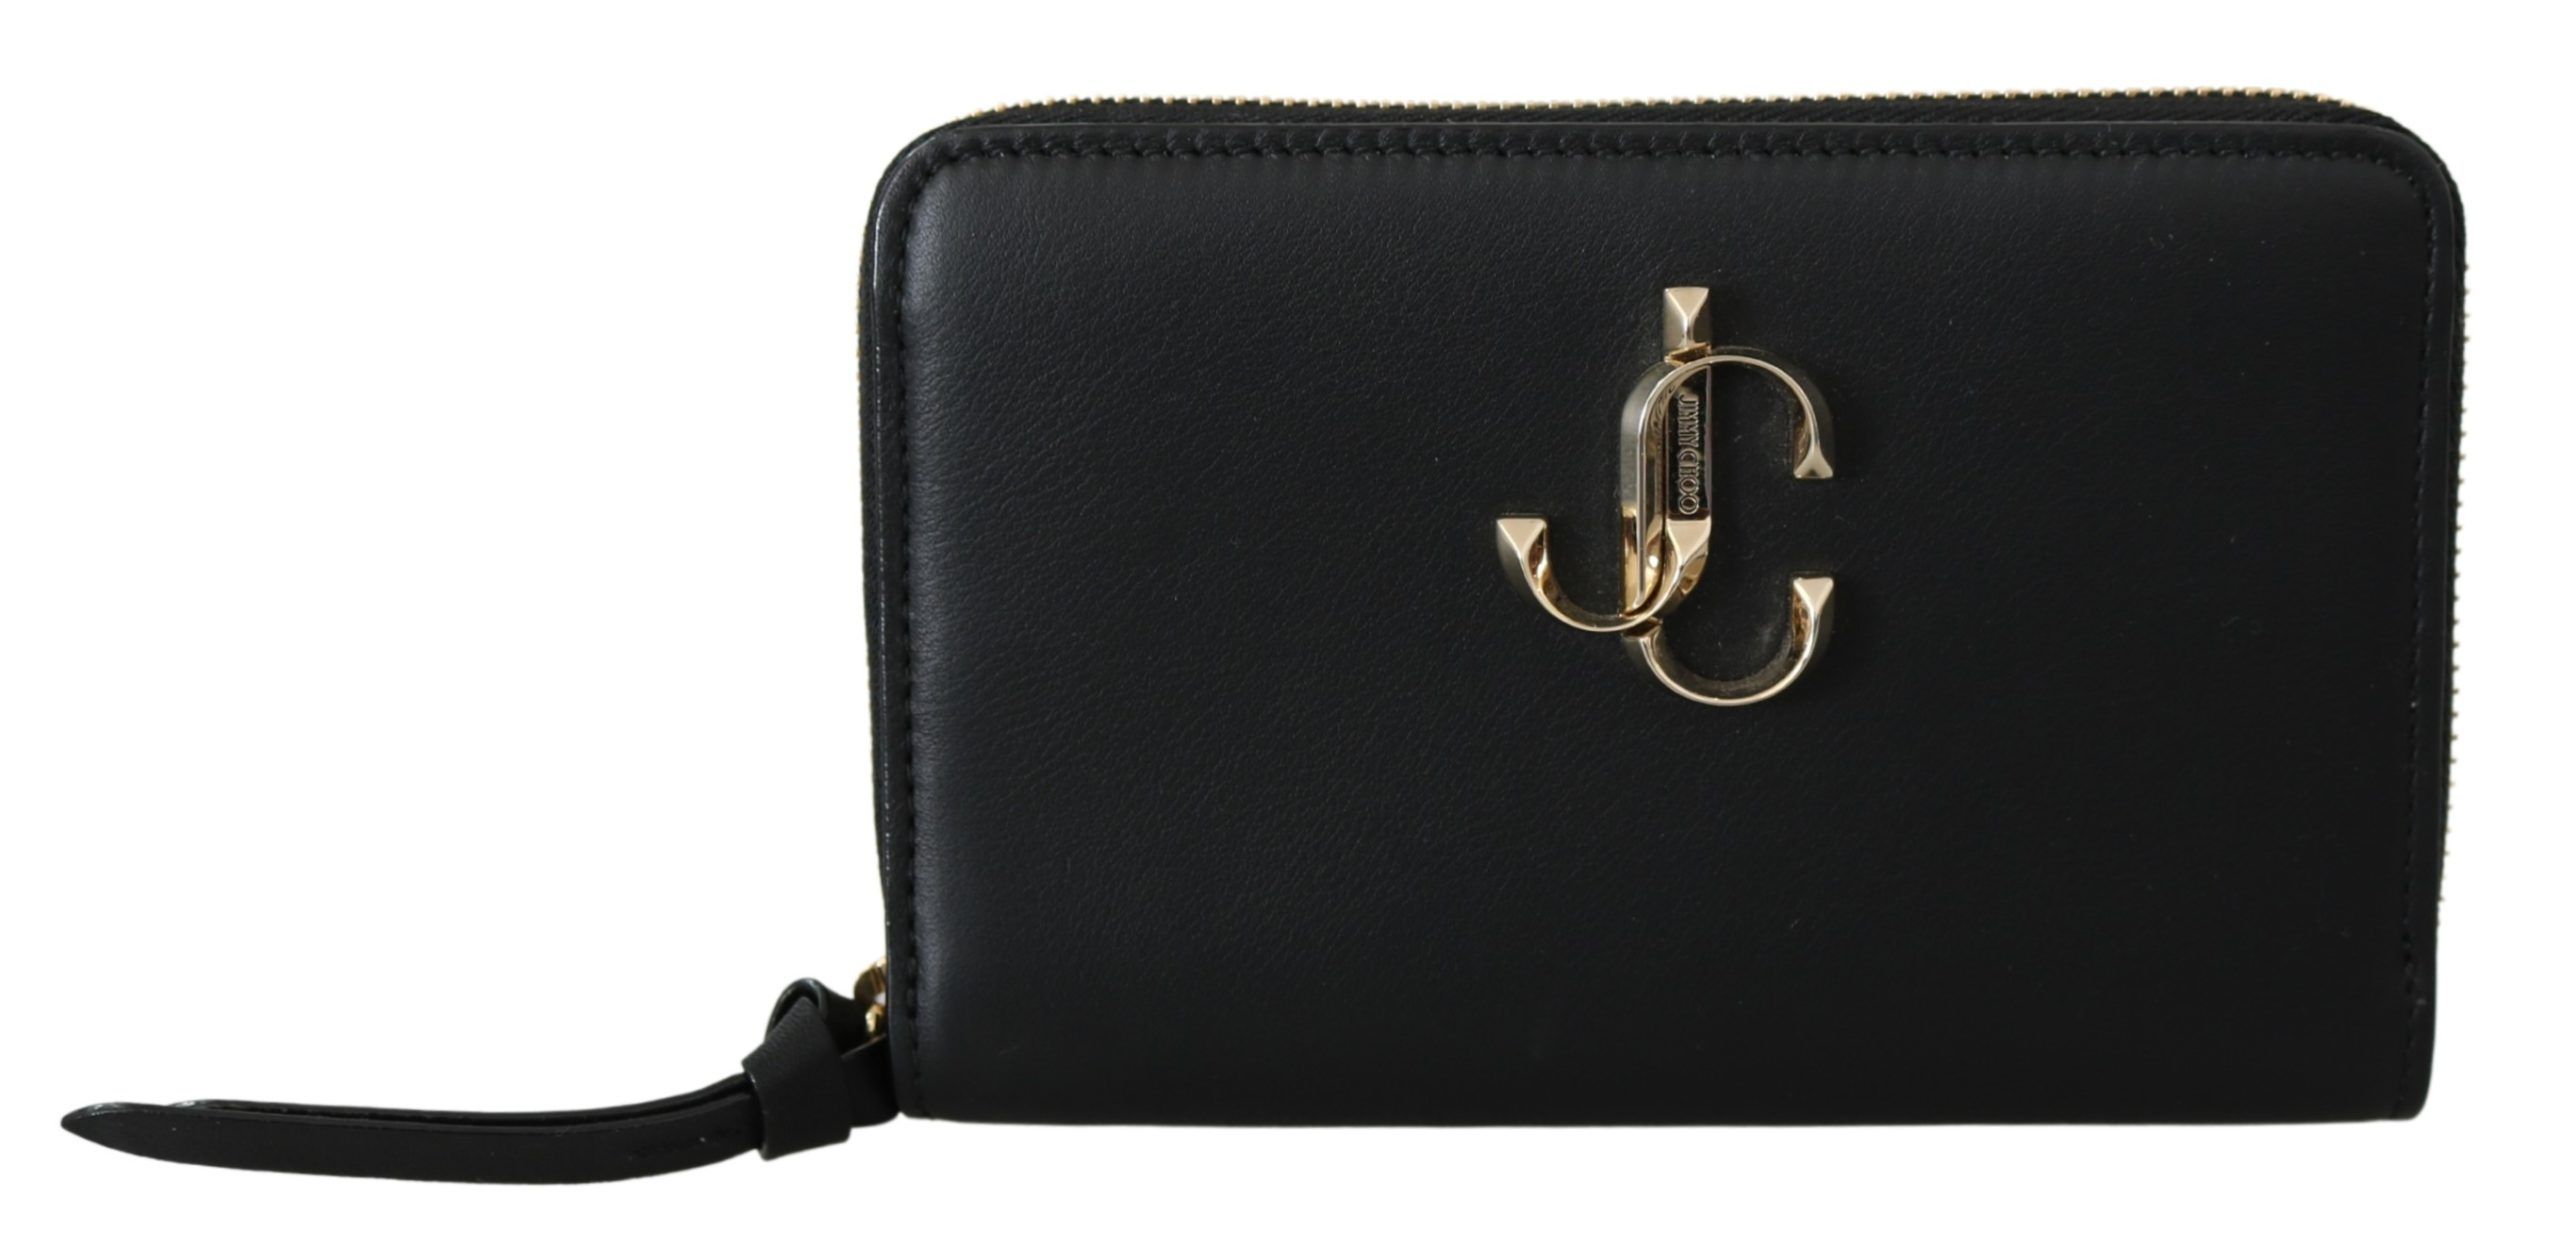 Gorgeous brand new with tags, dustbag and box. 
100% Authentic Jimmy Choo Wallet 
Model: Christie Clf 
Color: Black 
Material: 100% Calf Leather 
Details: Zip closer, Interior pocket, gold metal details 
Measurement L*H*W: 15cm*10cm*2cm 
Collection Season. 2021 A/W